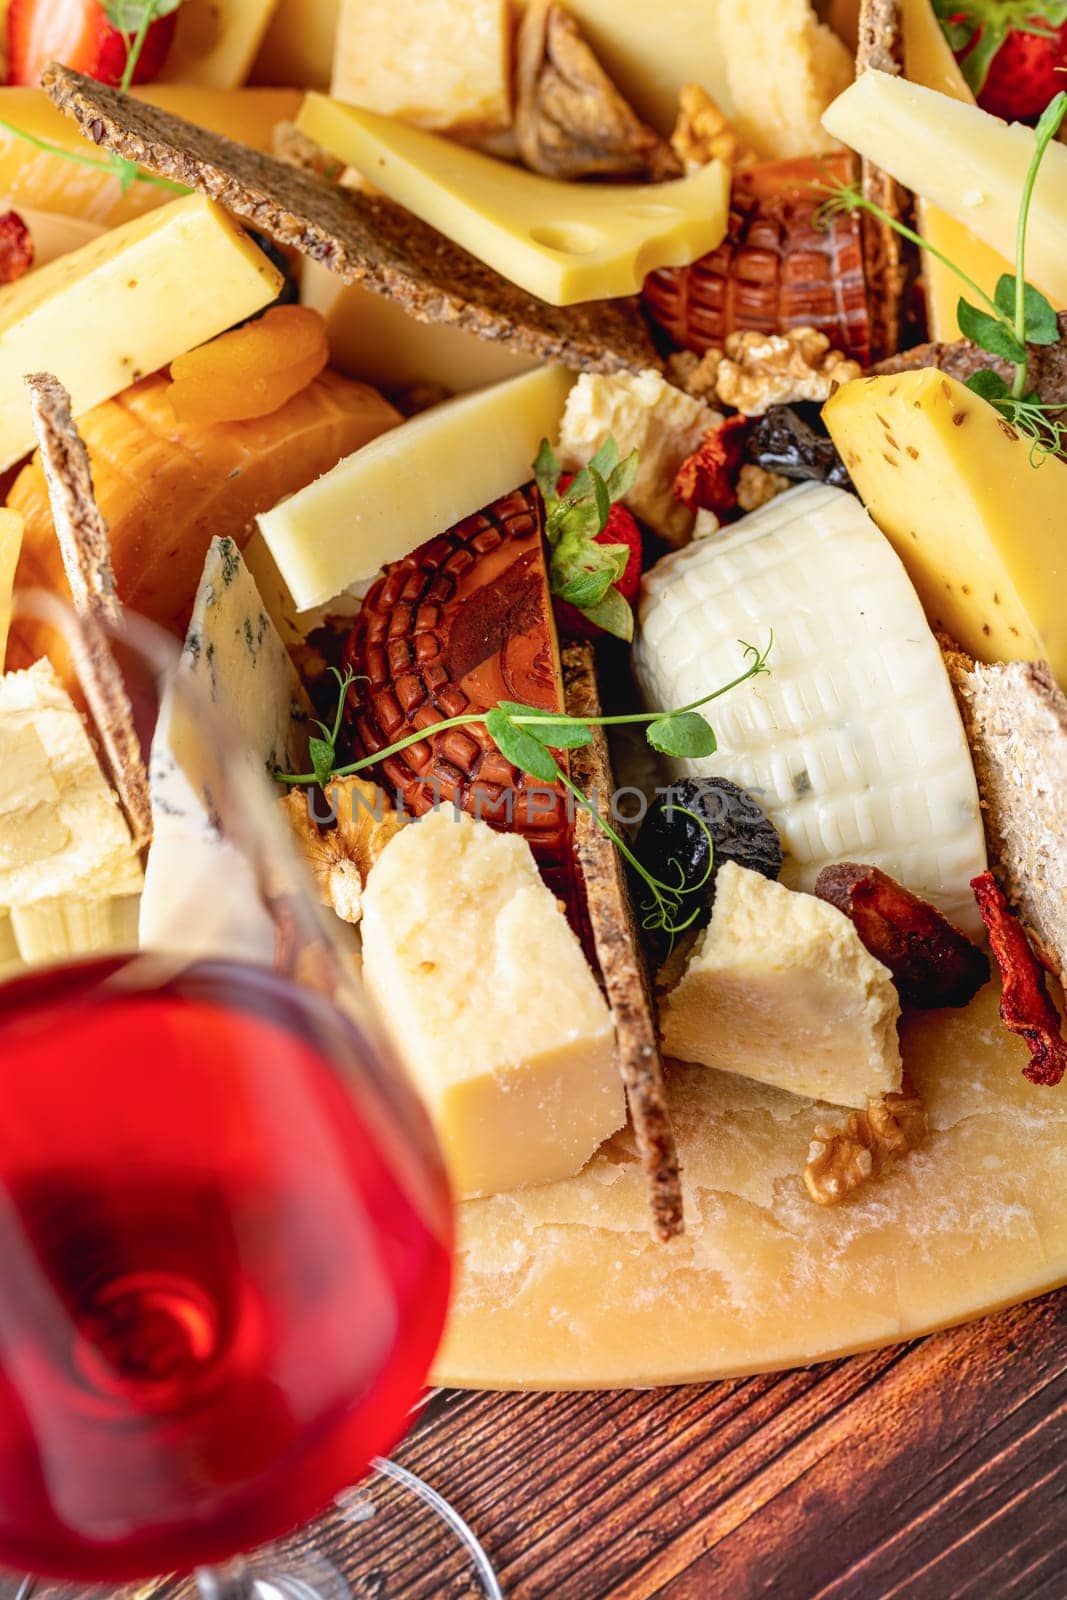 Cheese plate prepared with luxury cheeses and wine on wooden table